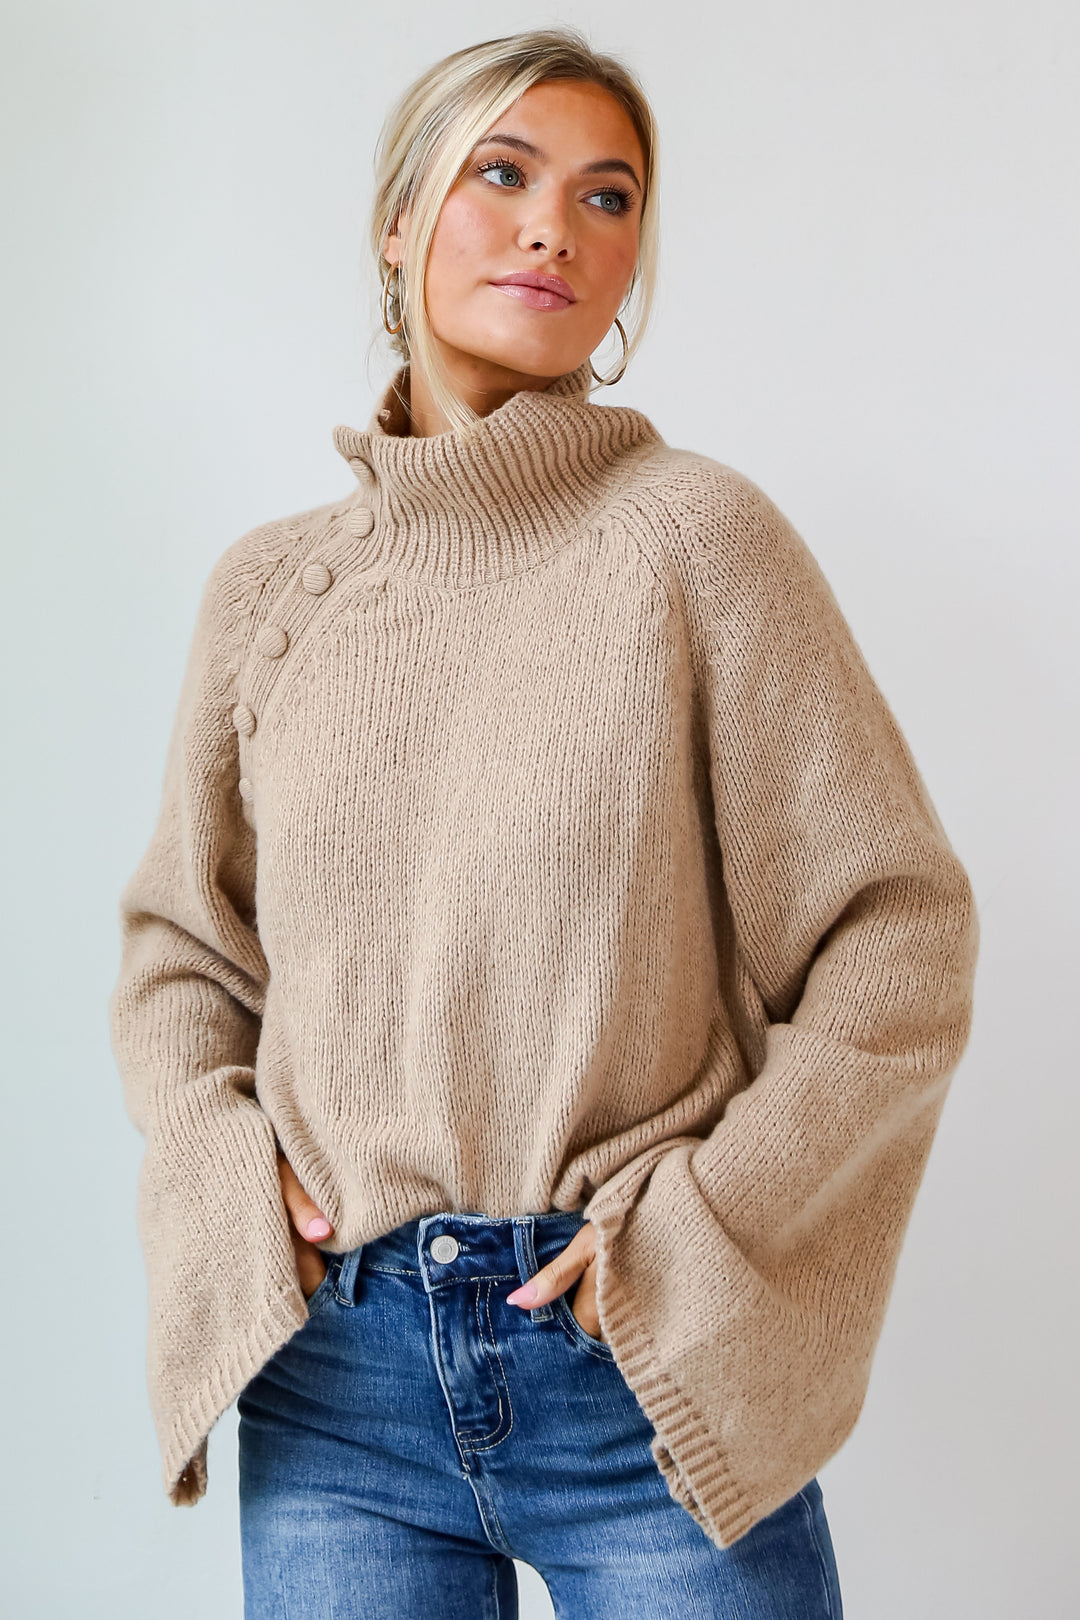 Mocha Oversized Sweater front view